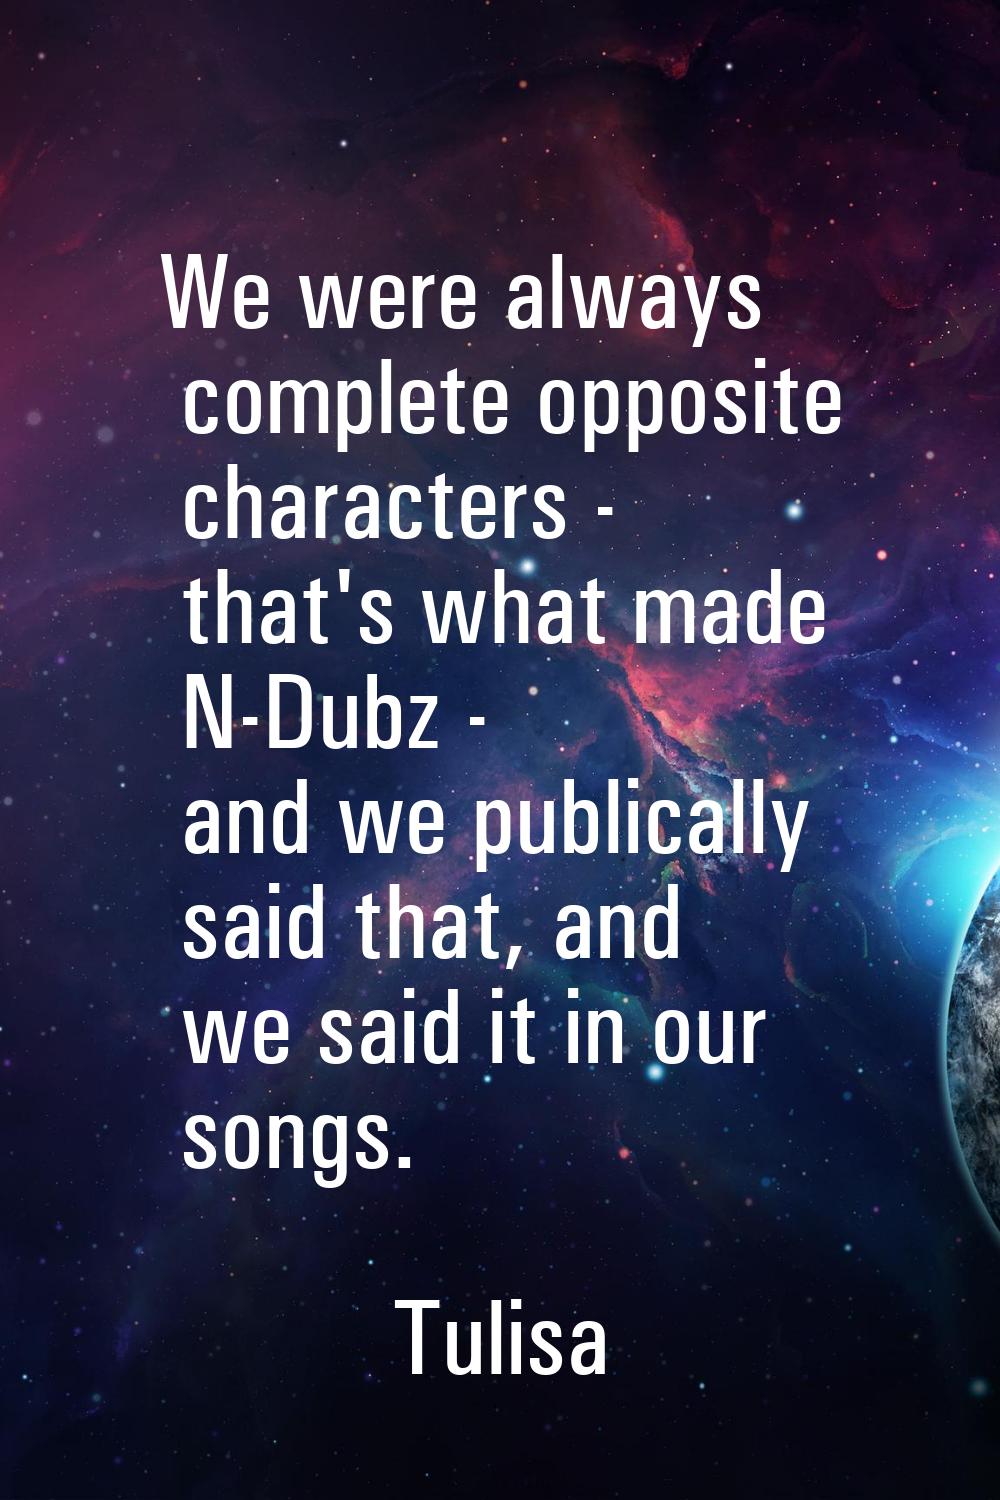 We were always complete opposite characters - that's what made N-Dubz - and we publically said that